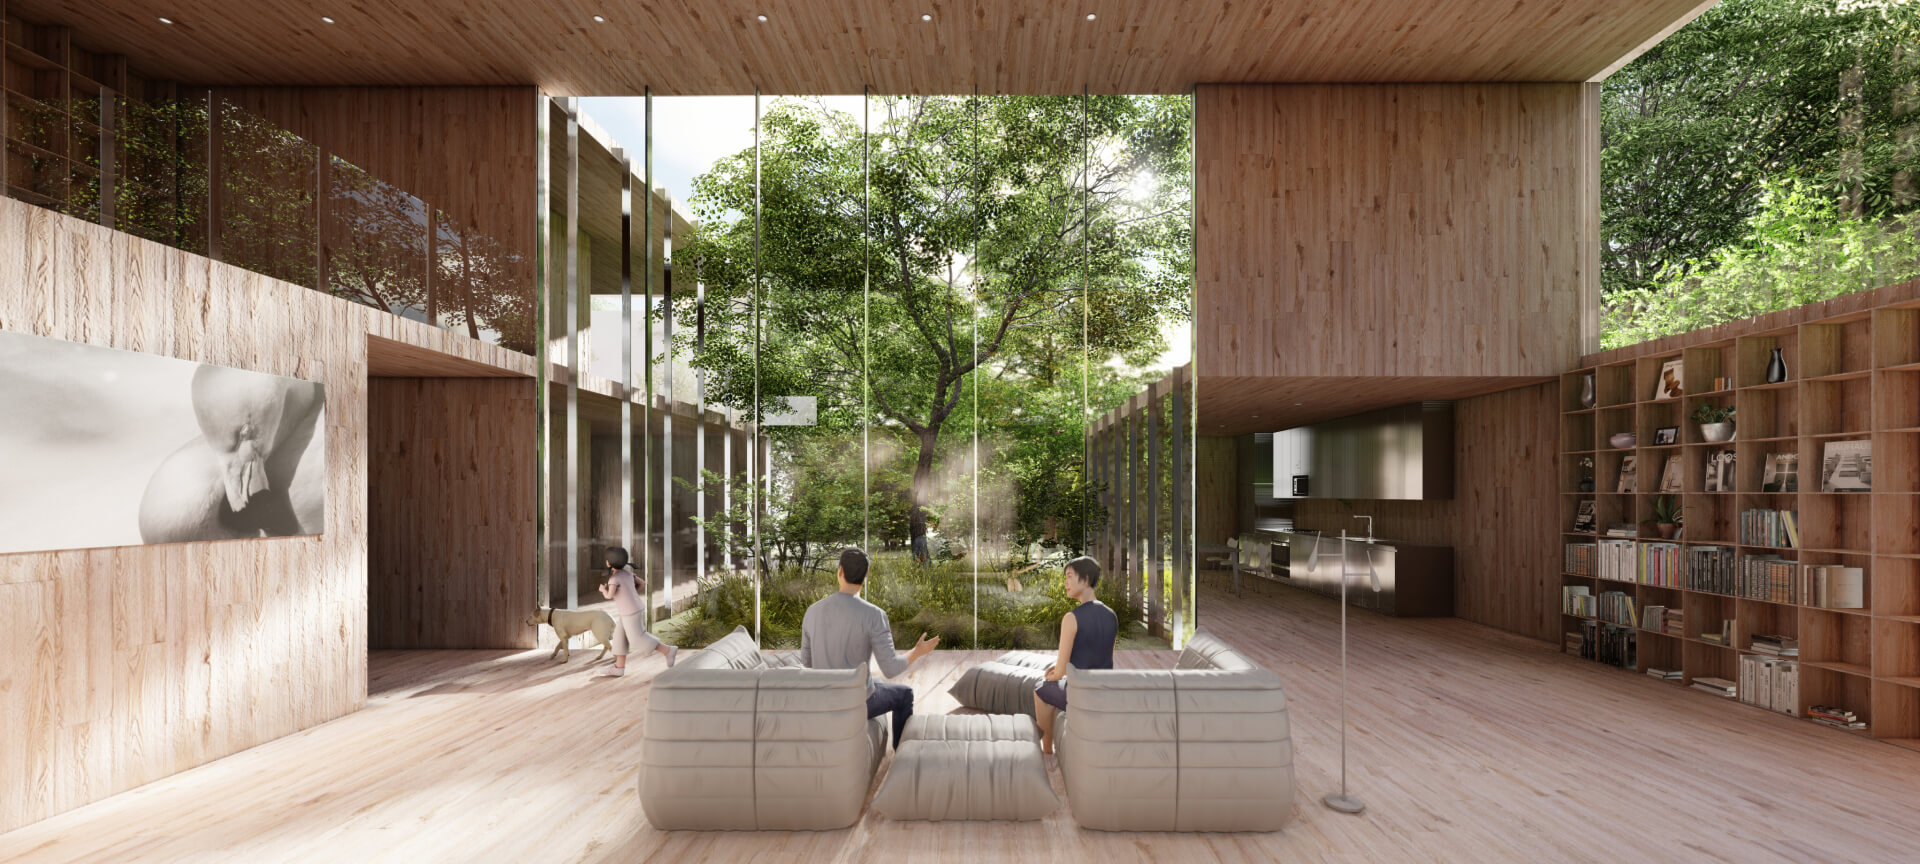 japanese-architects.com - Build a house in Japan with full English support